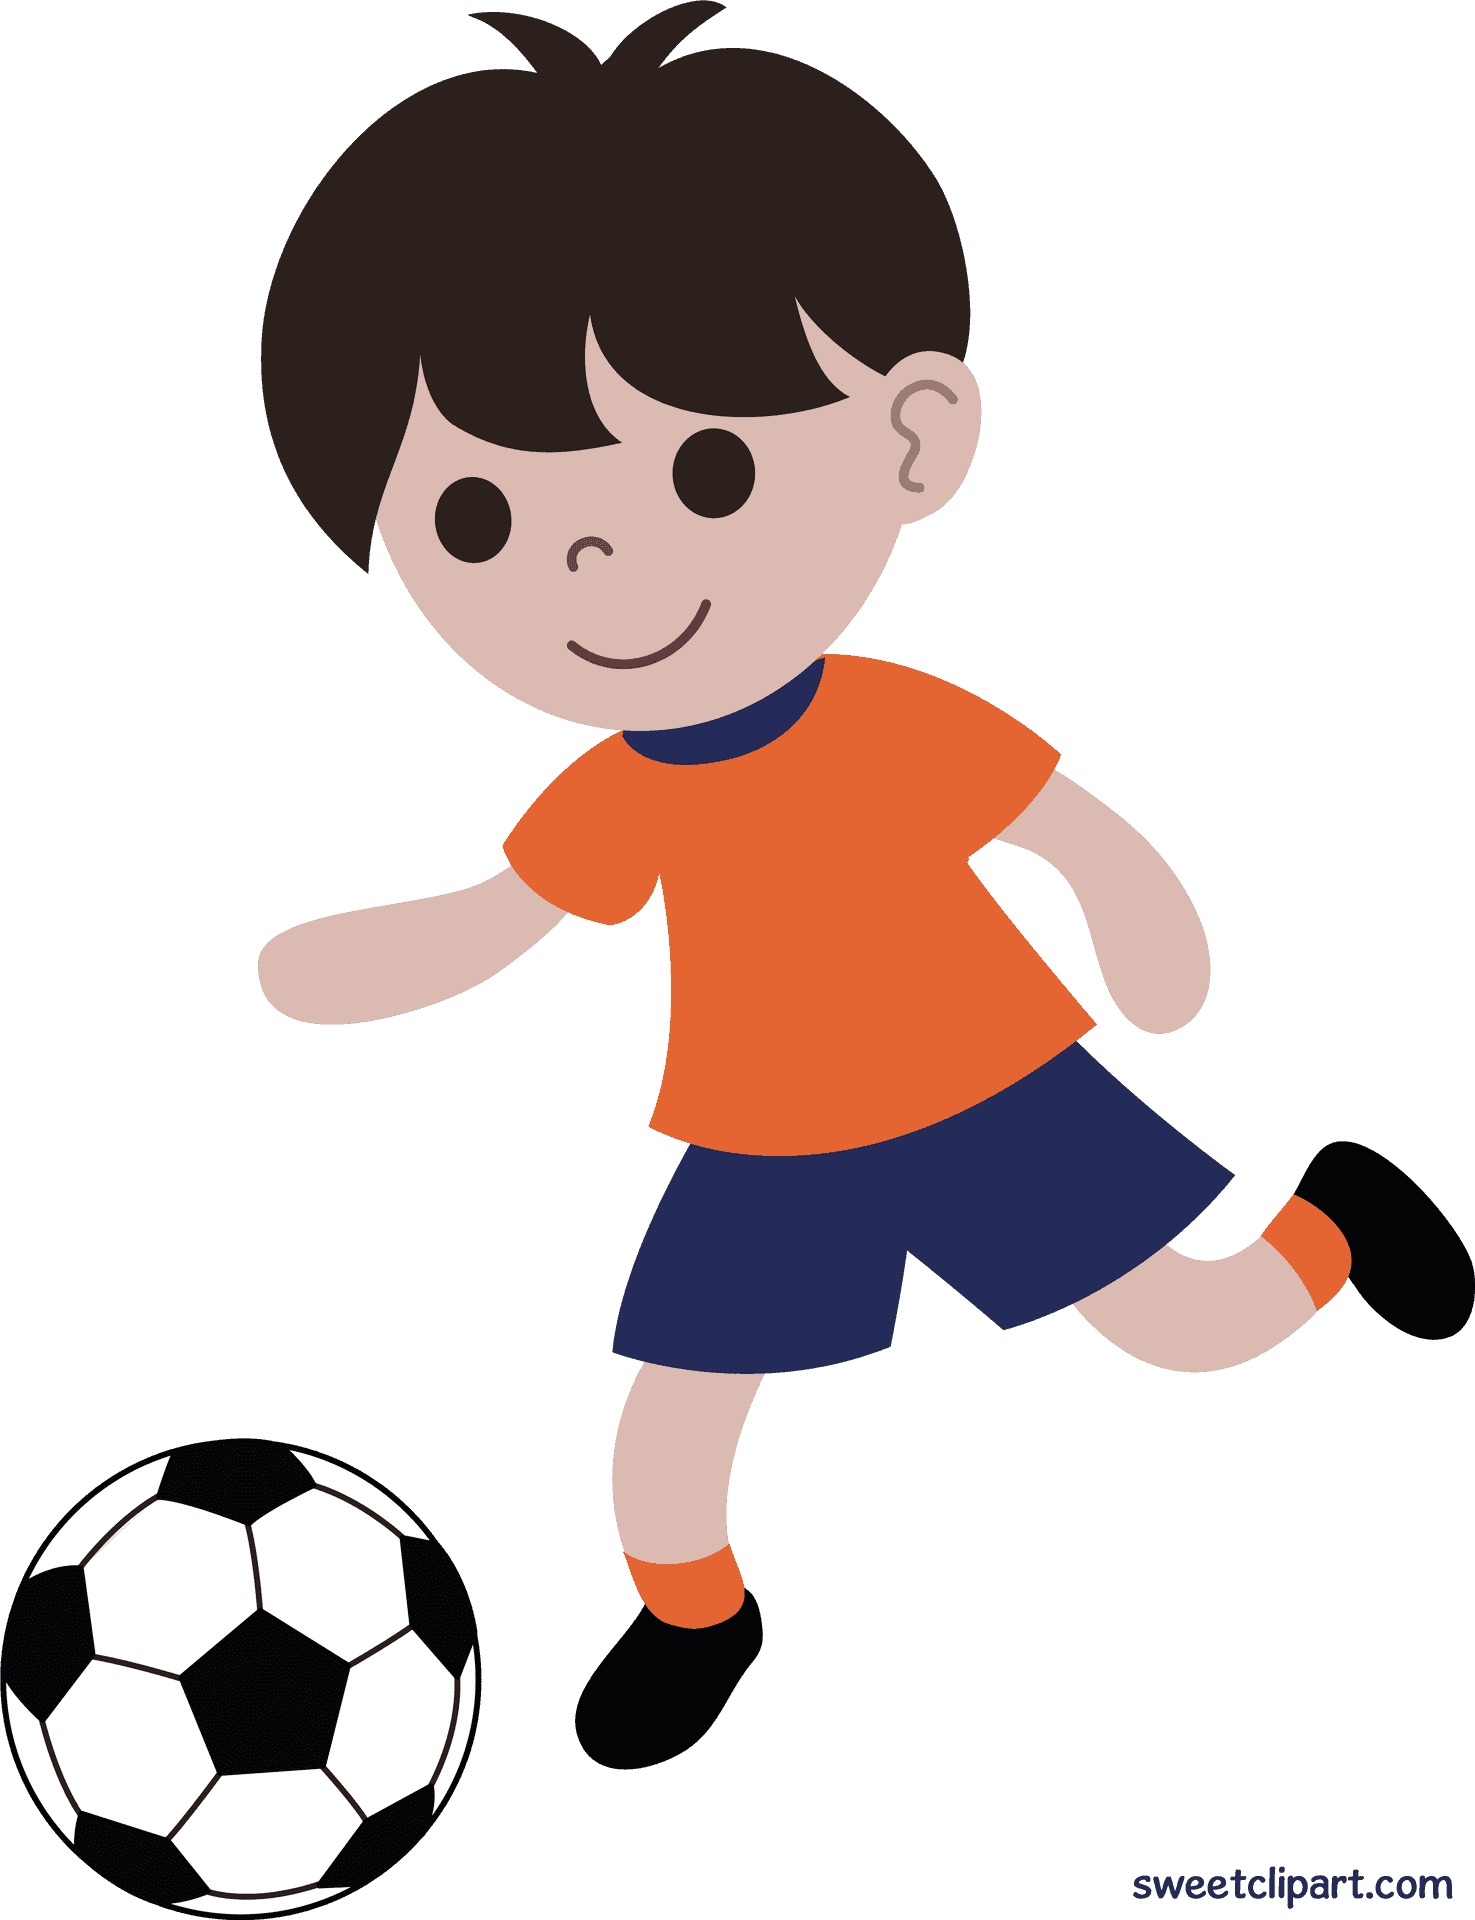 Animated Child Soccer Player PNG